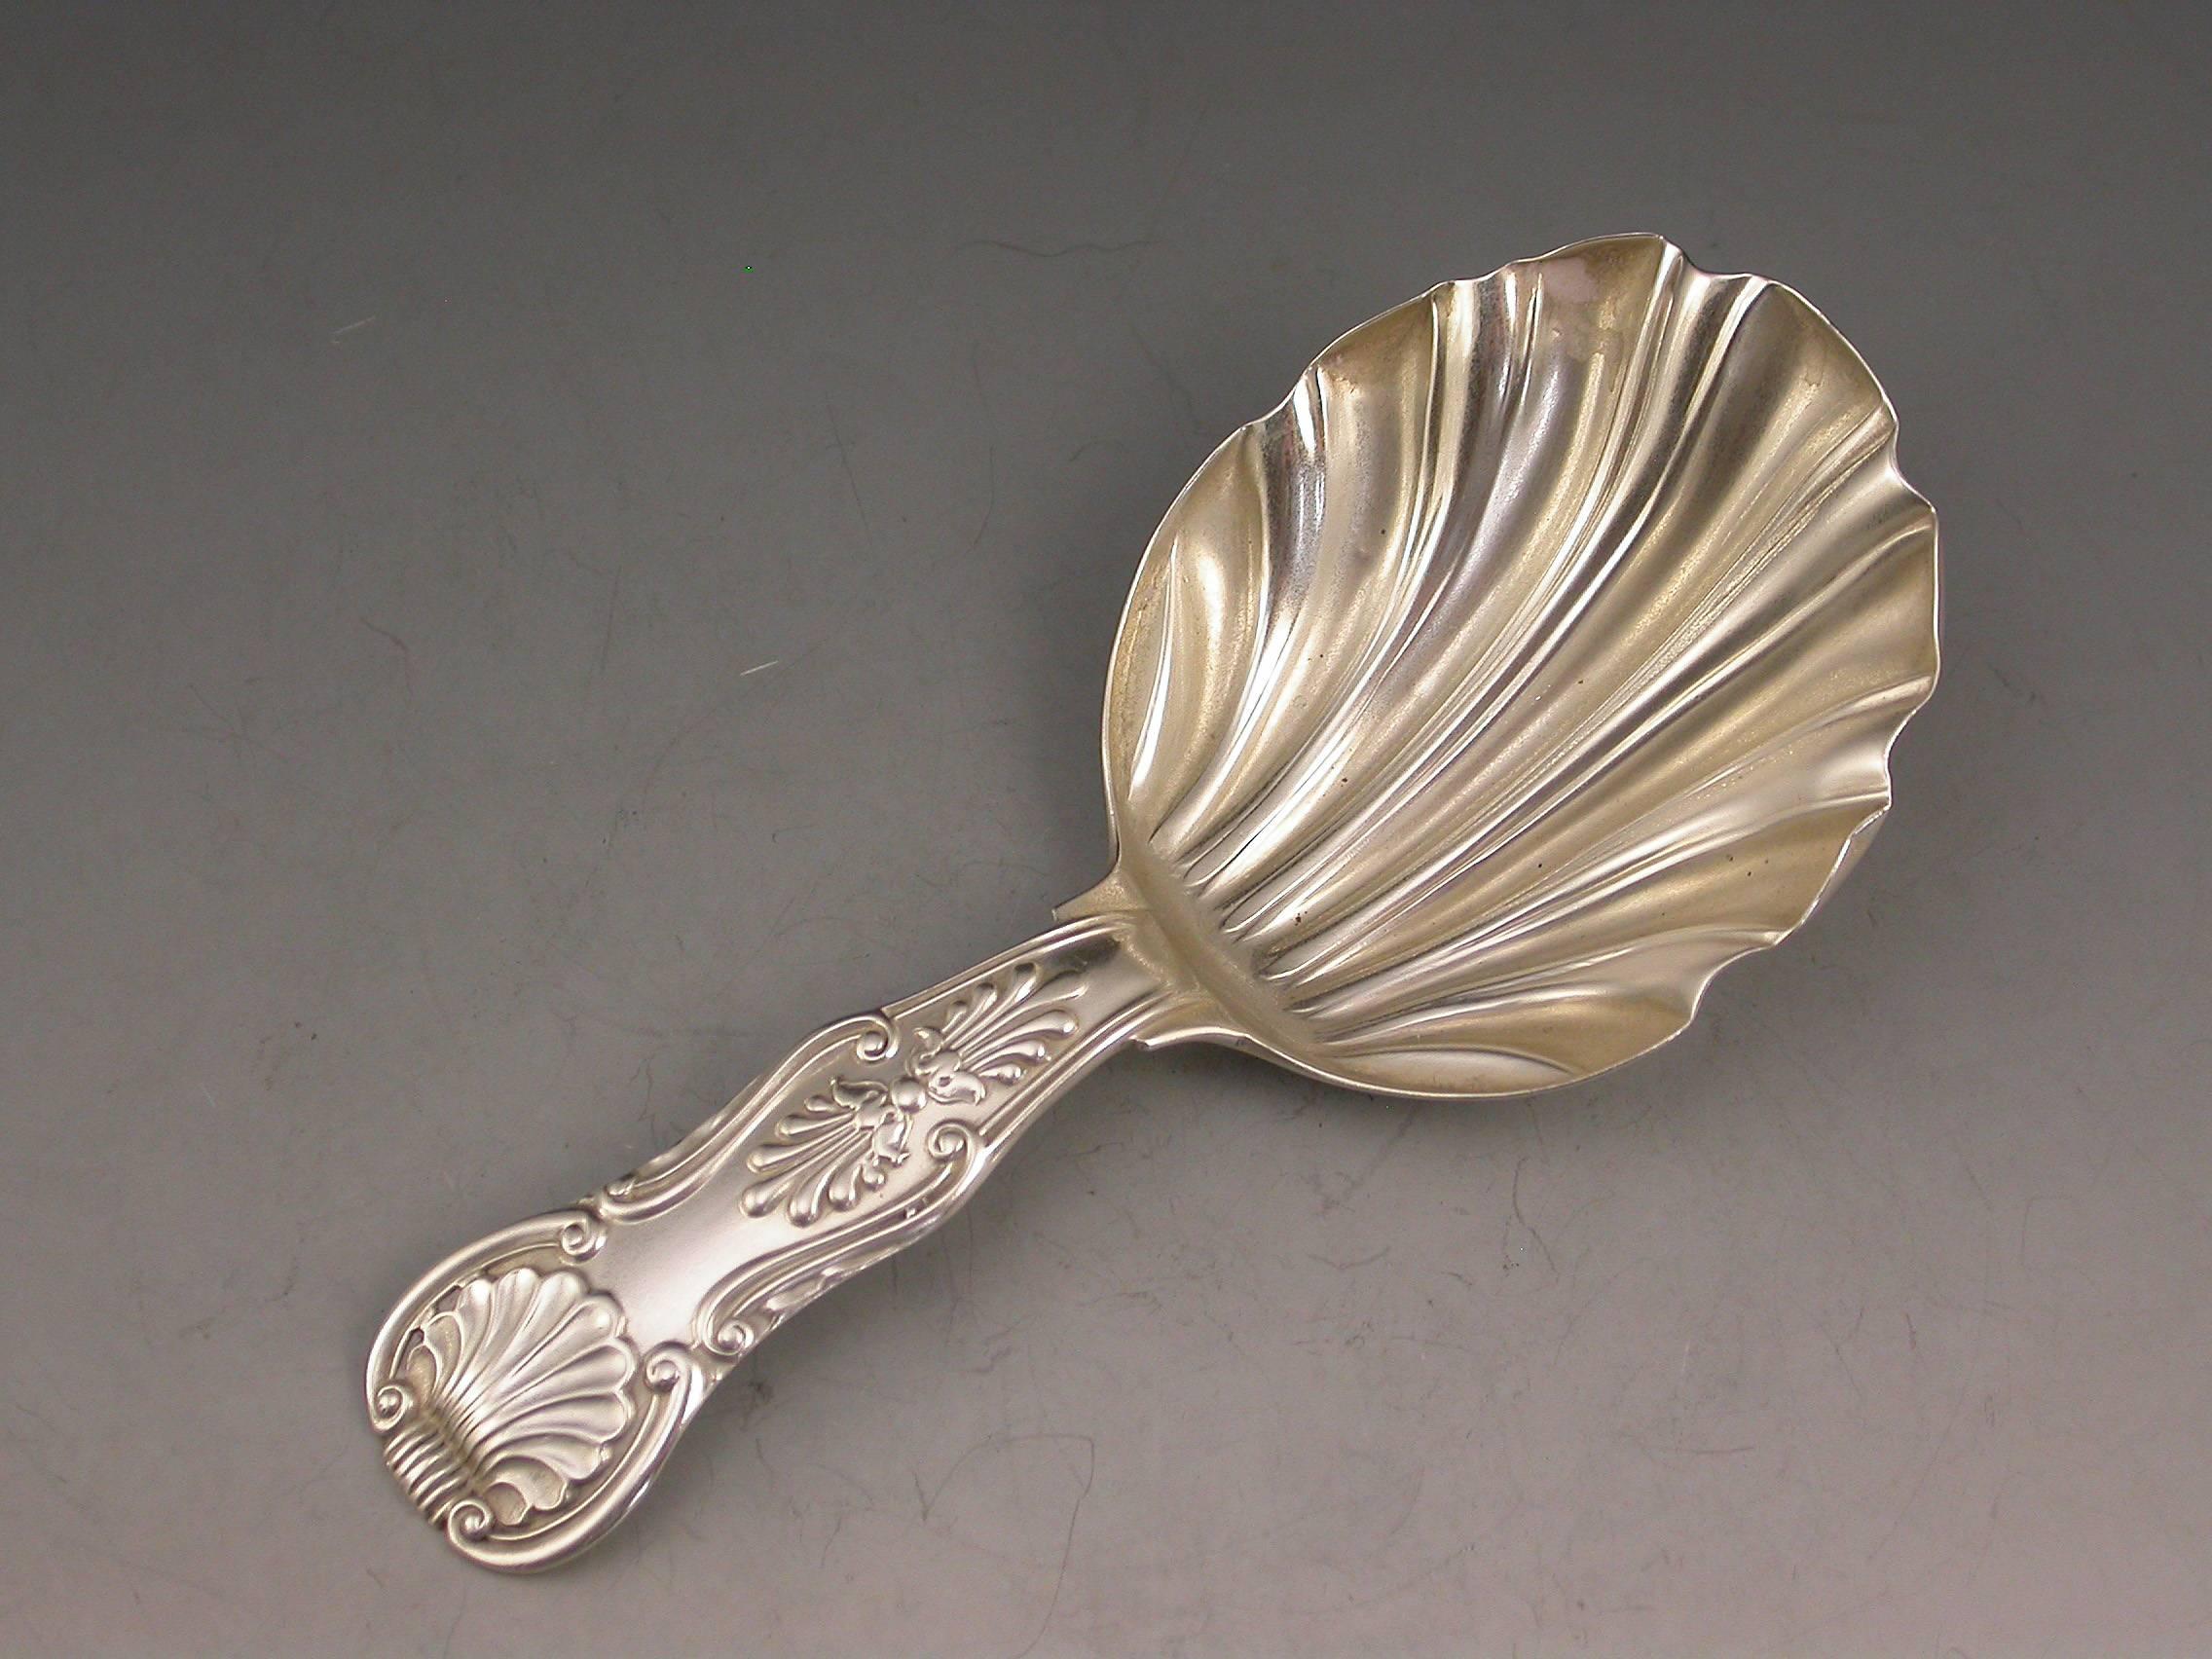 William IV Provincial silver kings pattern caddy spoon
John Walton, Newcastle, 1832
A rare William IV provincial silver caddy spoon with kings pattern handle and large scallop shell fluted bowl.

By John Walton, Newcastle, 1832

In good